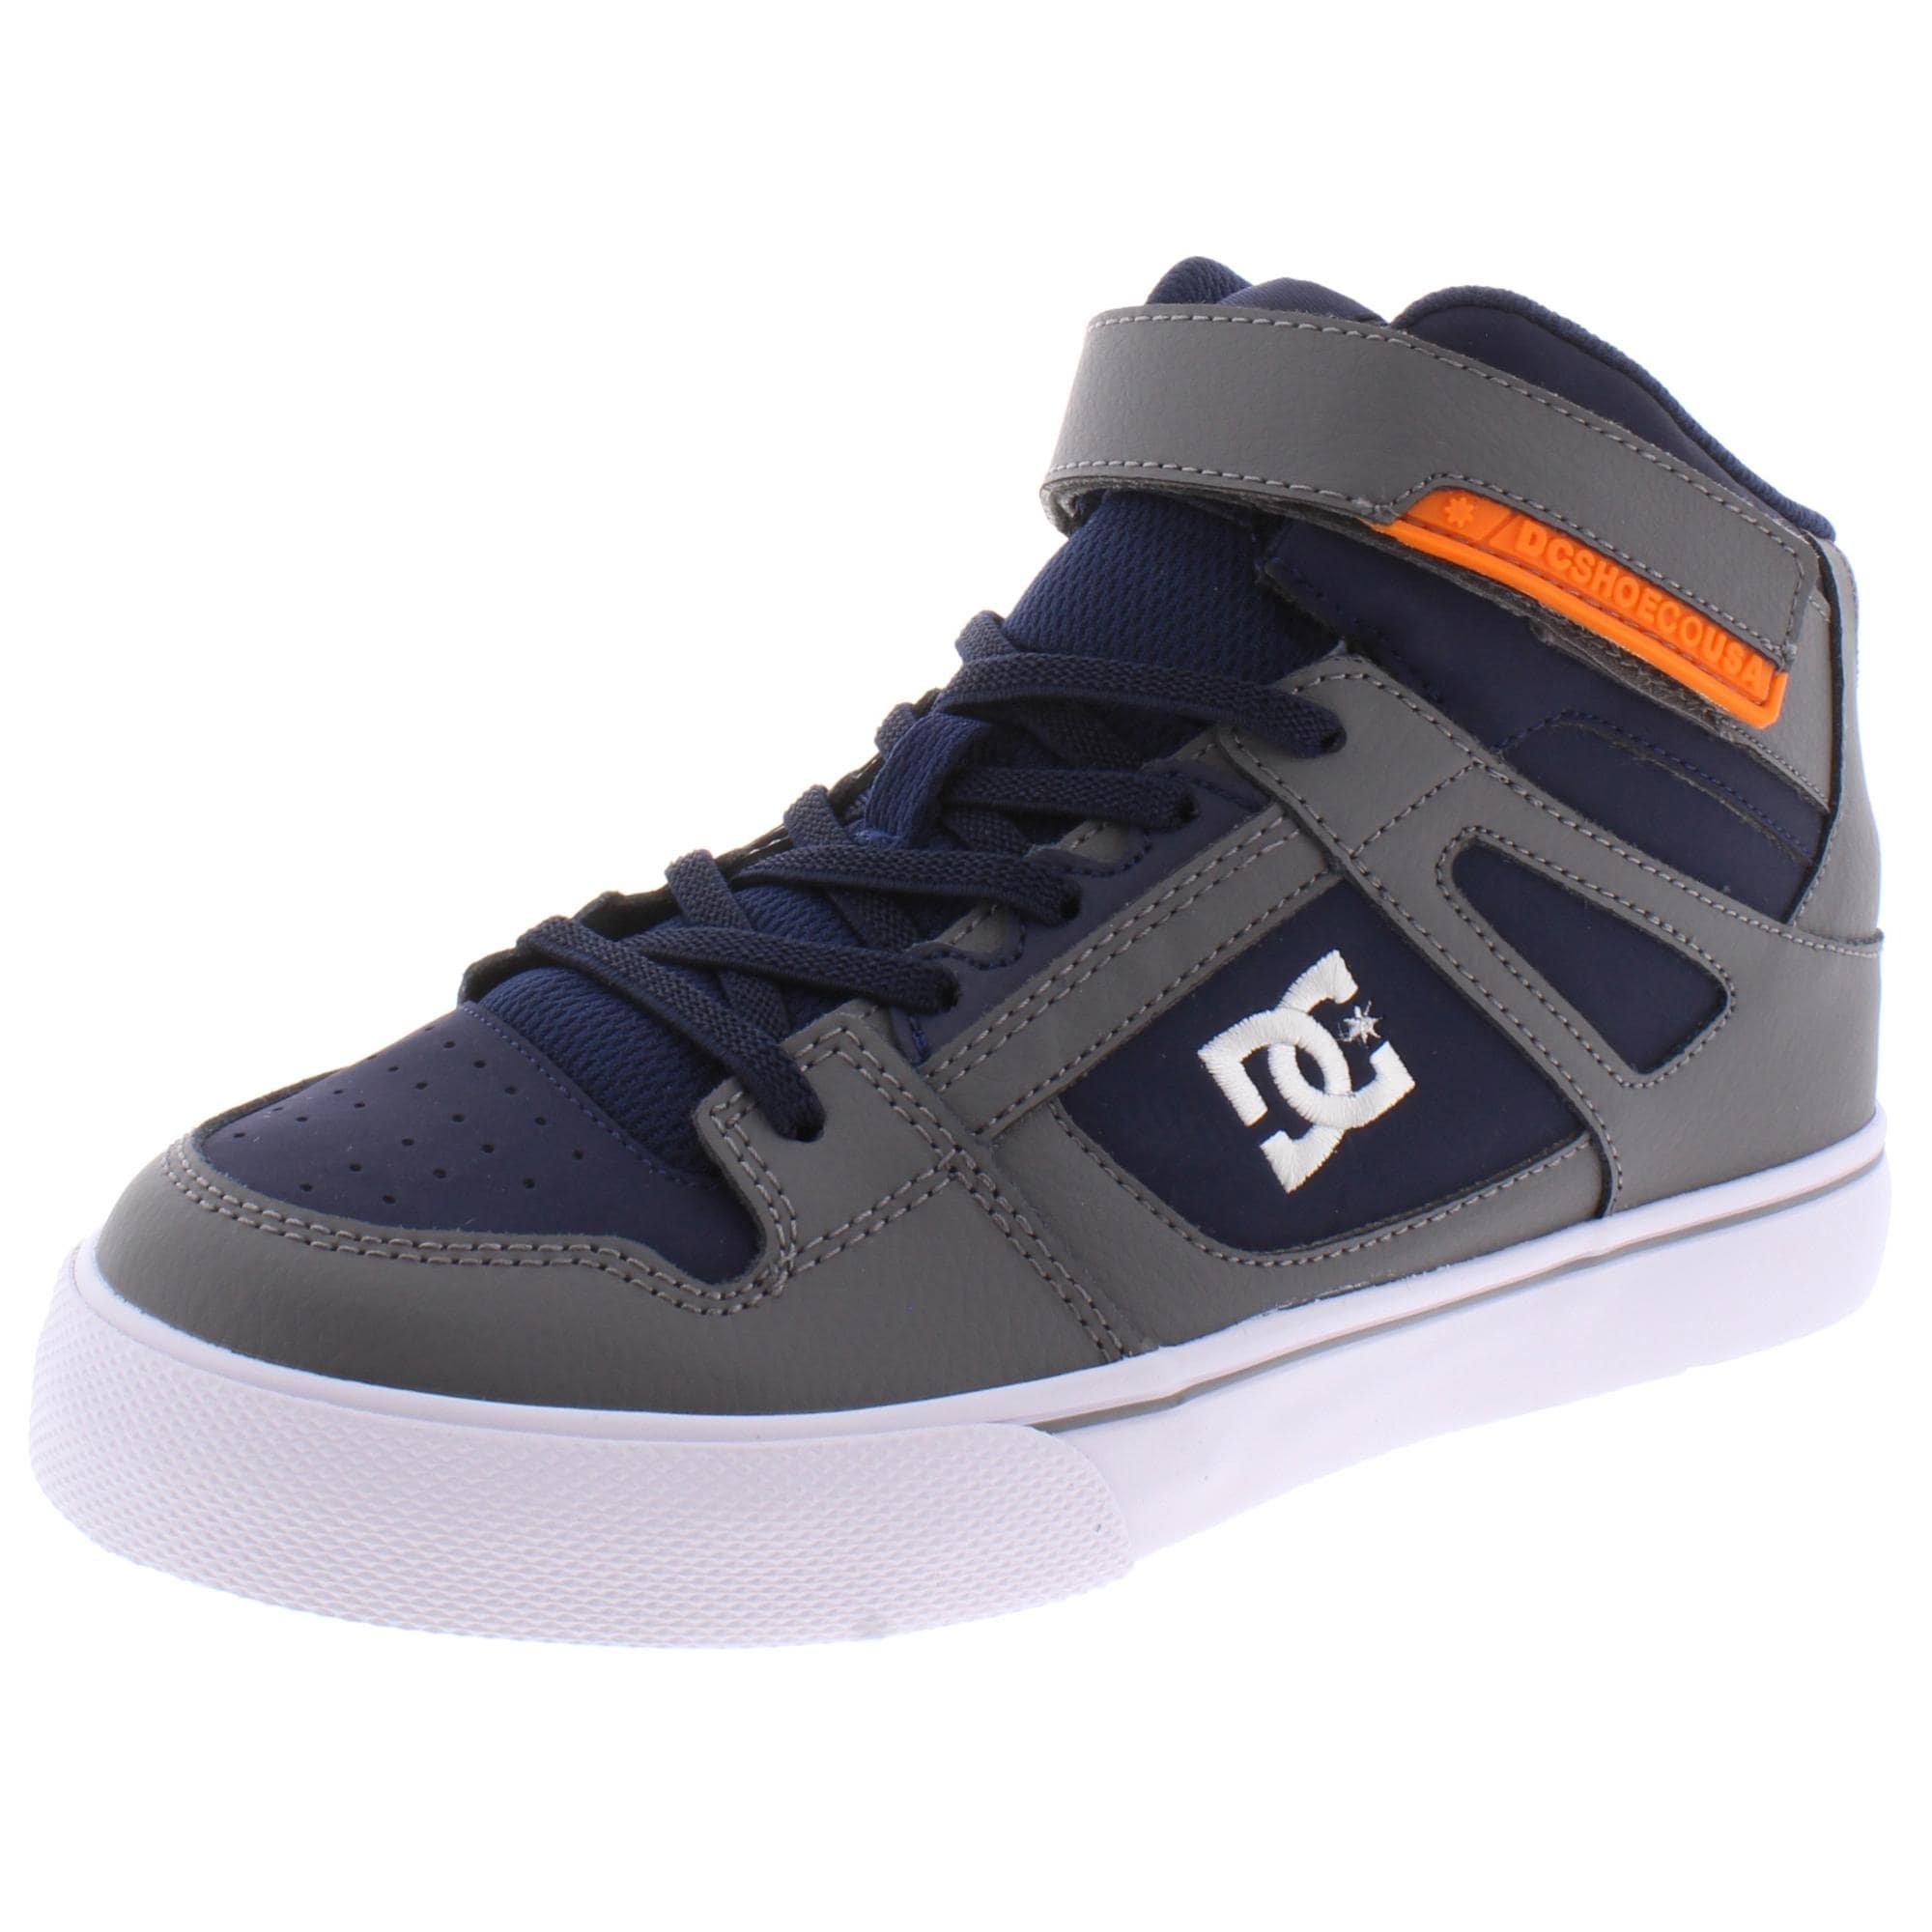 sports direct dc trainers